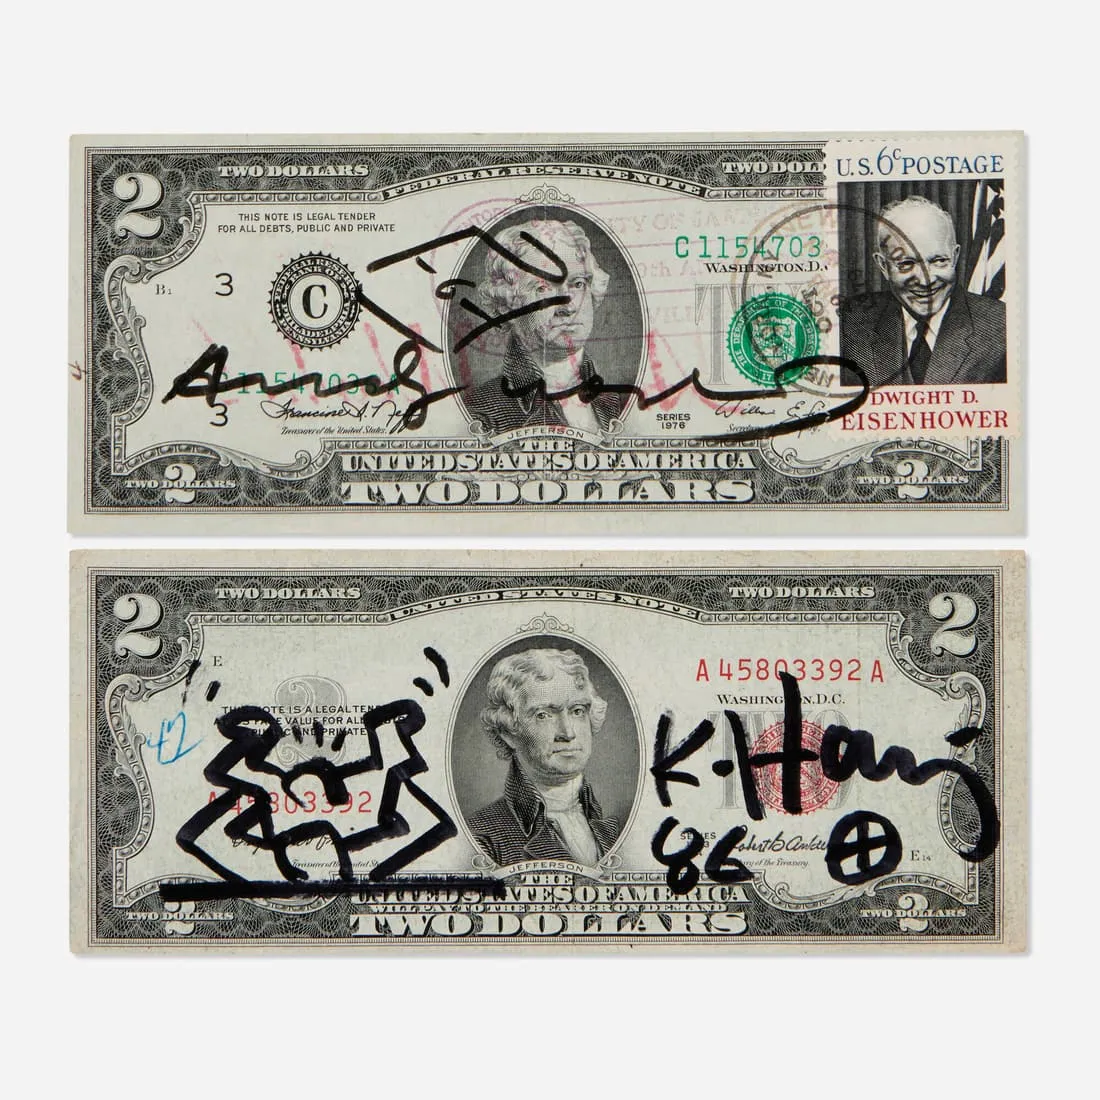 Two-dollar bills signed by Warhol and Haring star in our weekly pick of five auction highlights